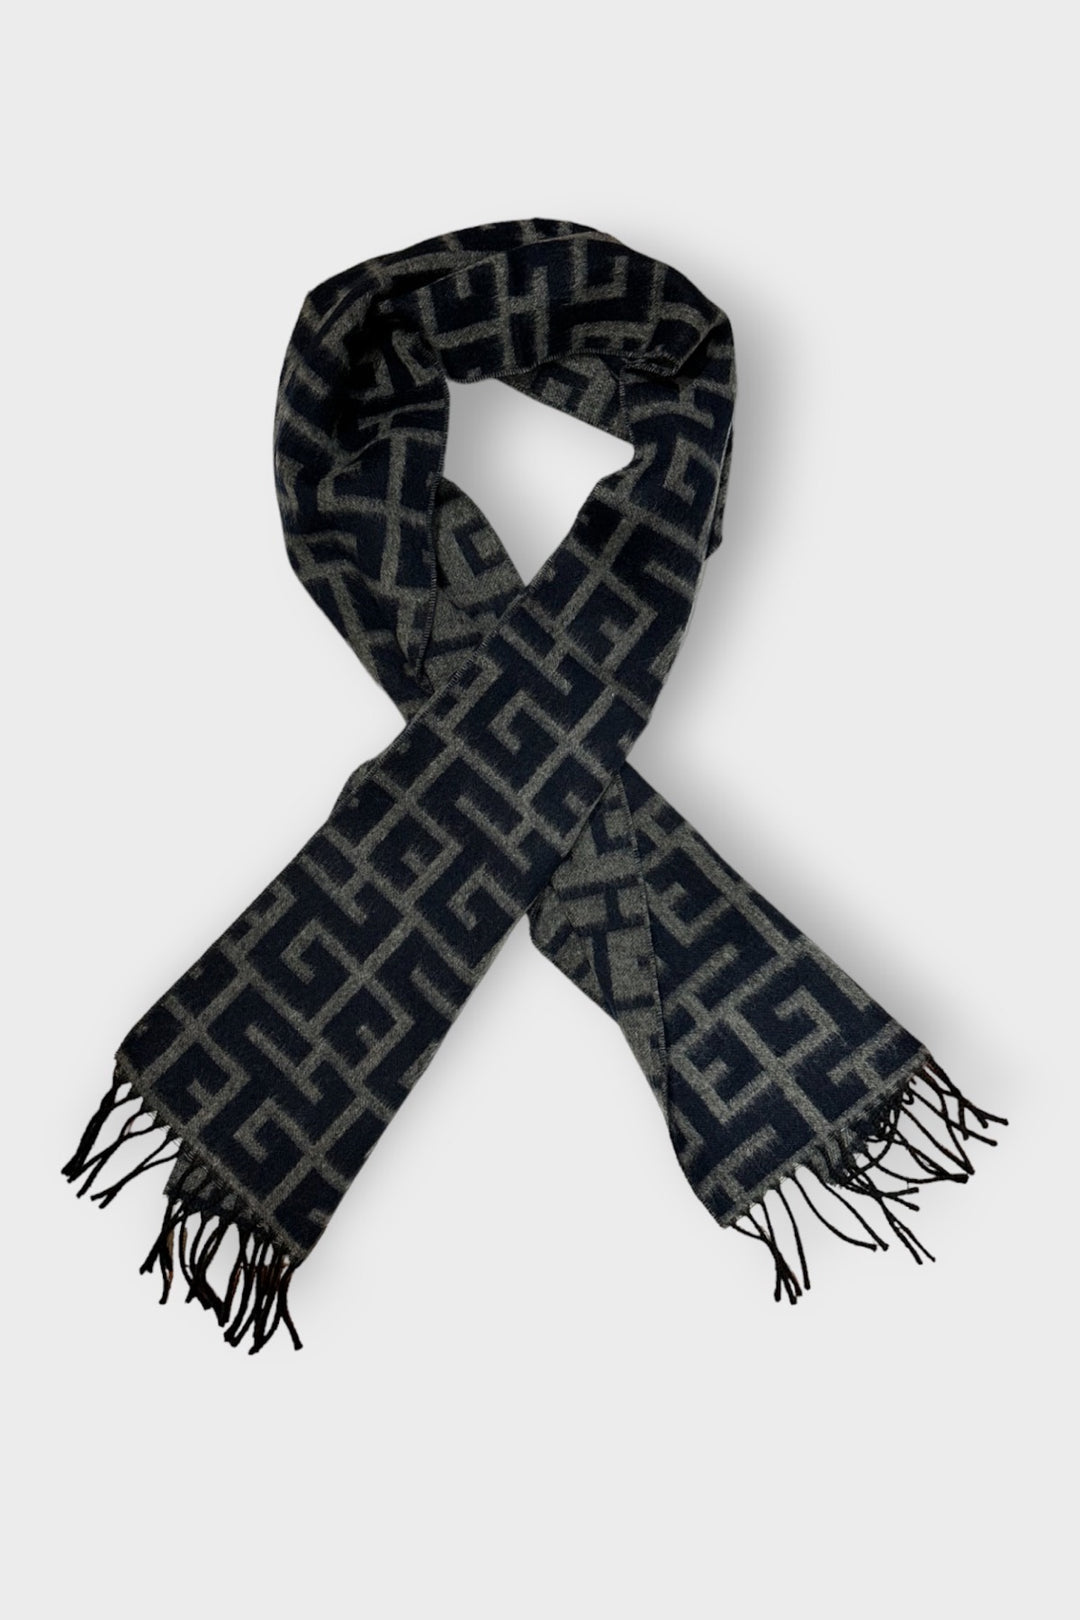 Artistic patterned cashmere scarf